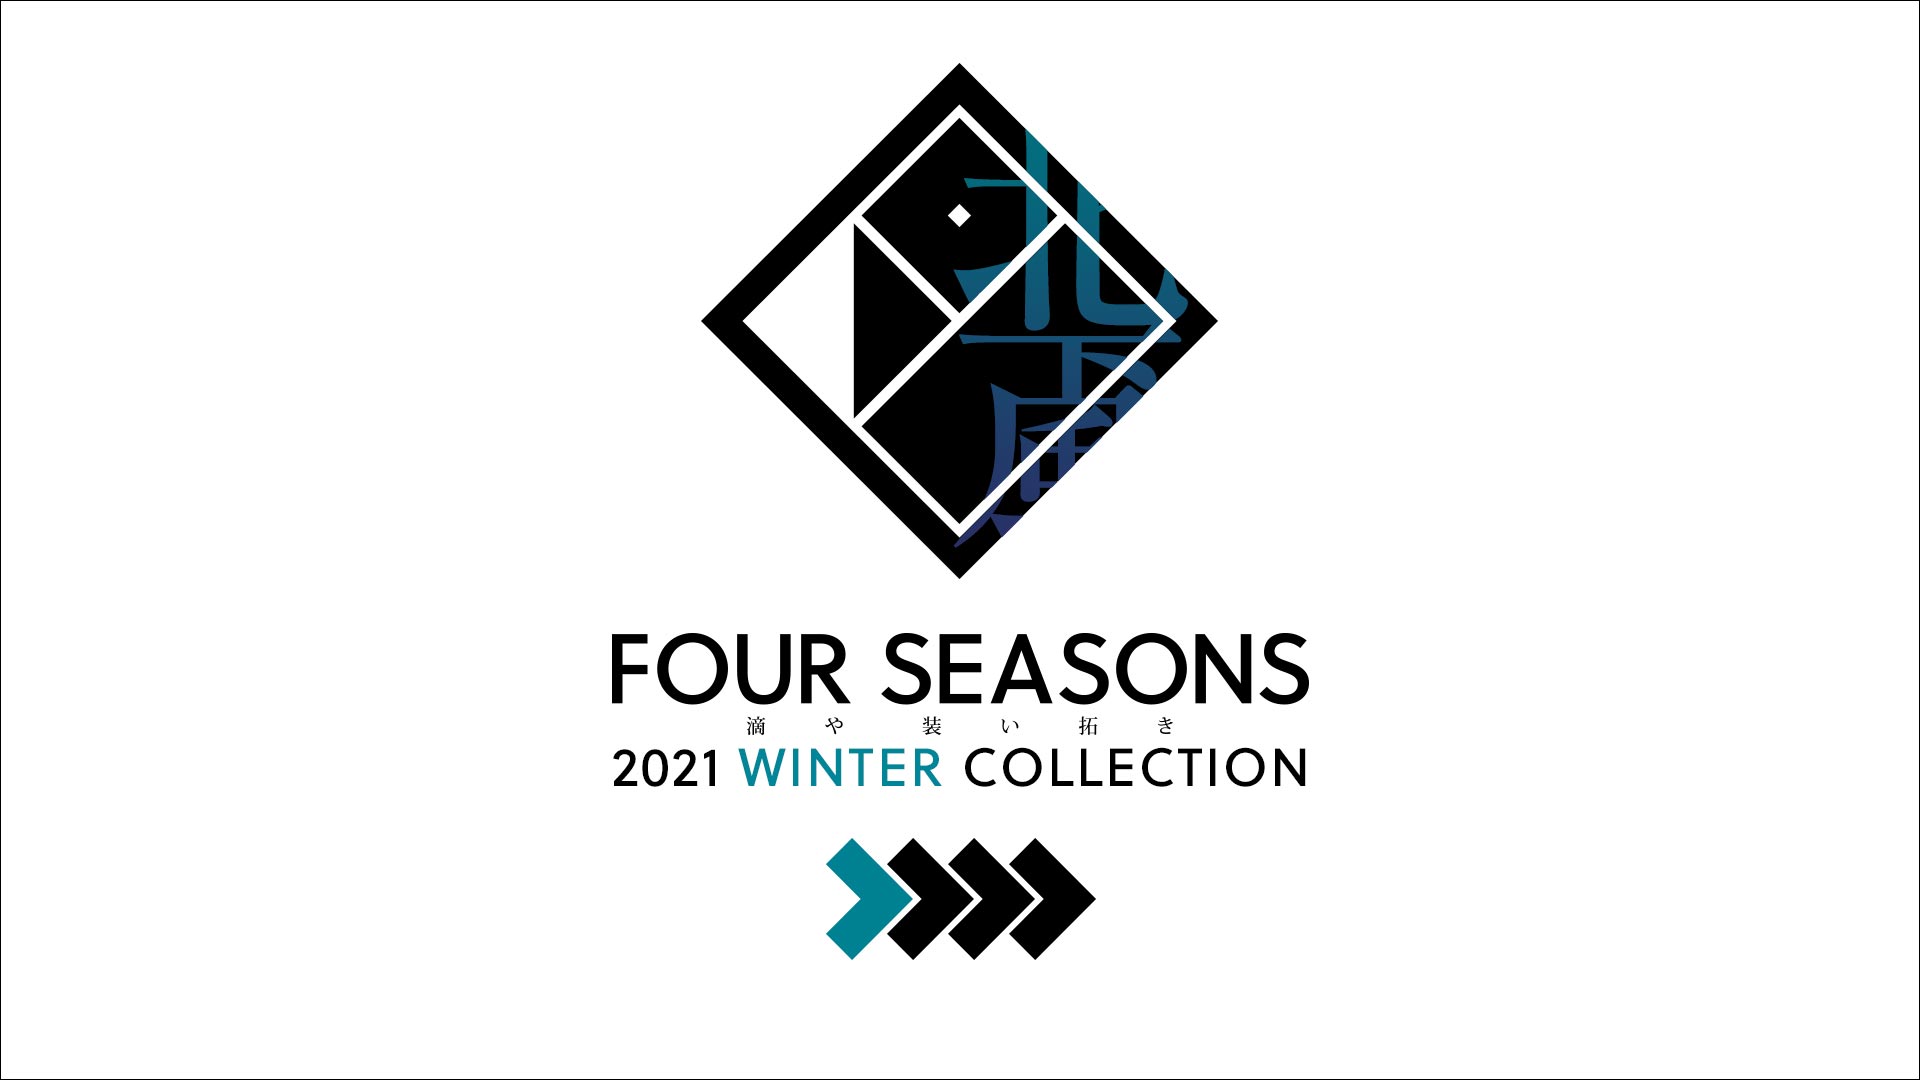 [PHOTO:FOUR SEASONS 2021 WINTER COLLECTION]